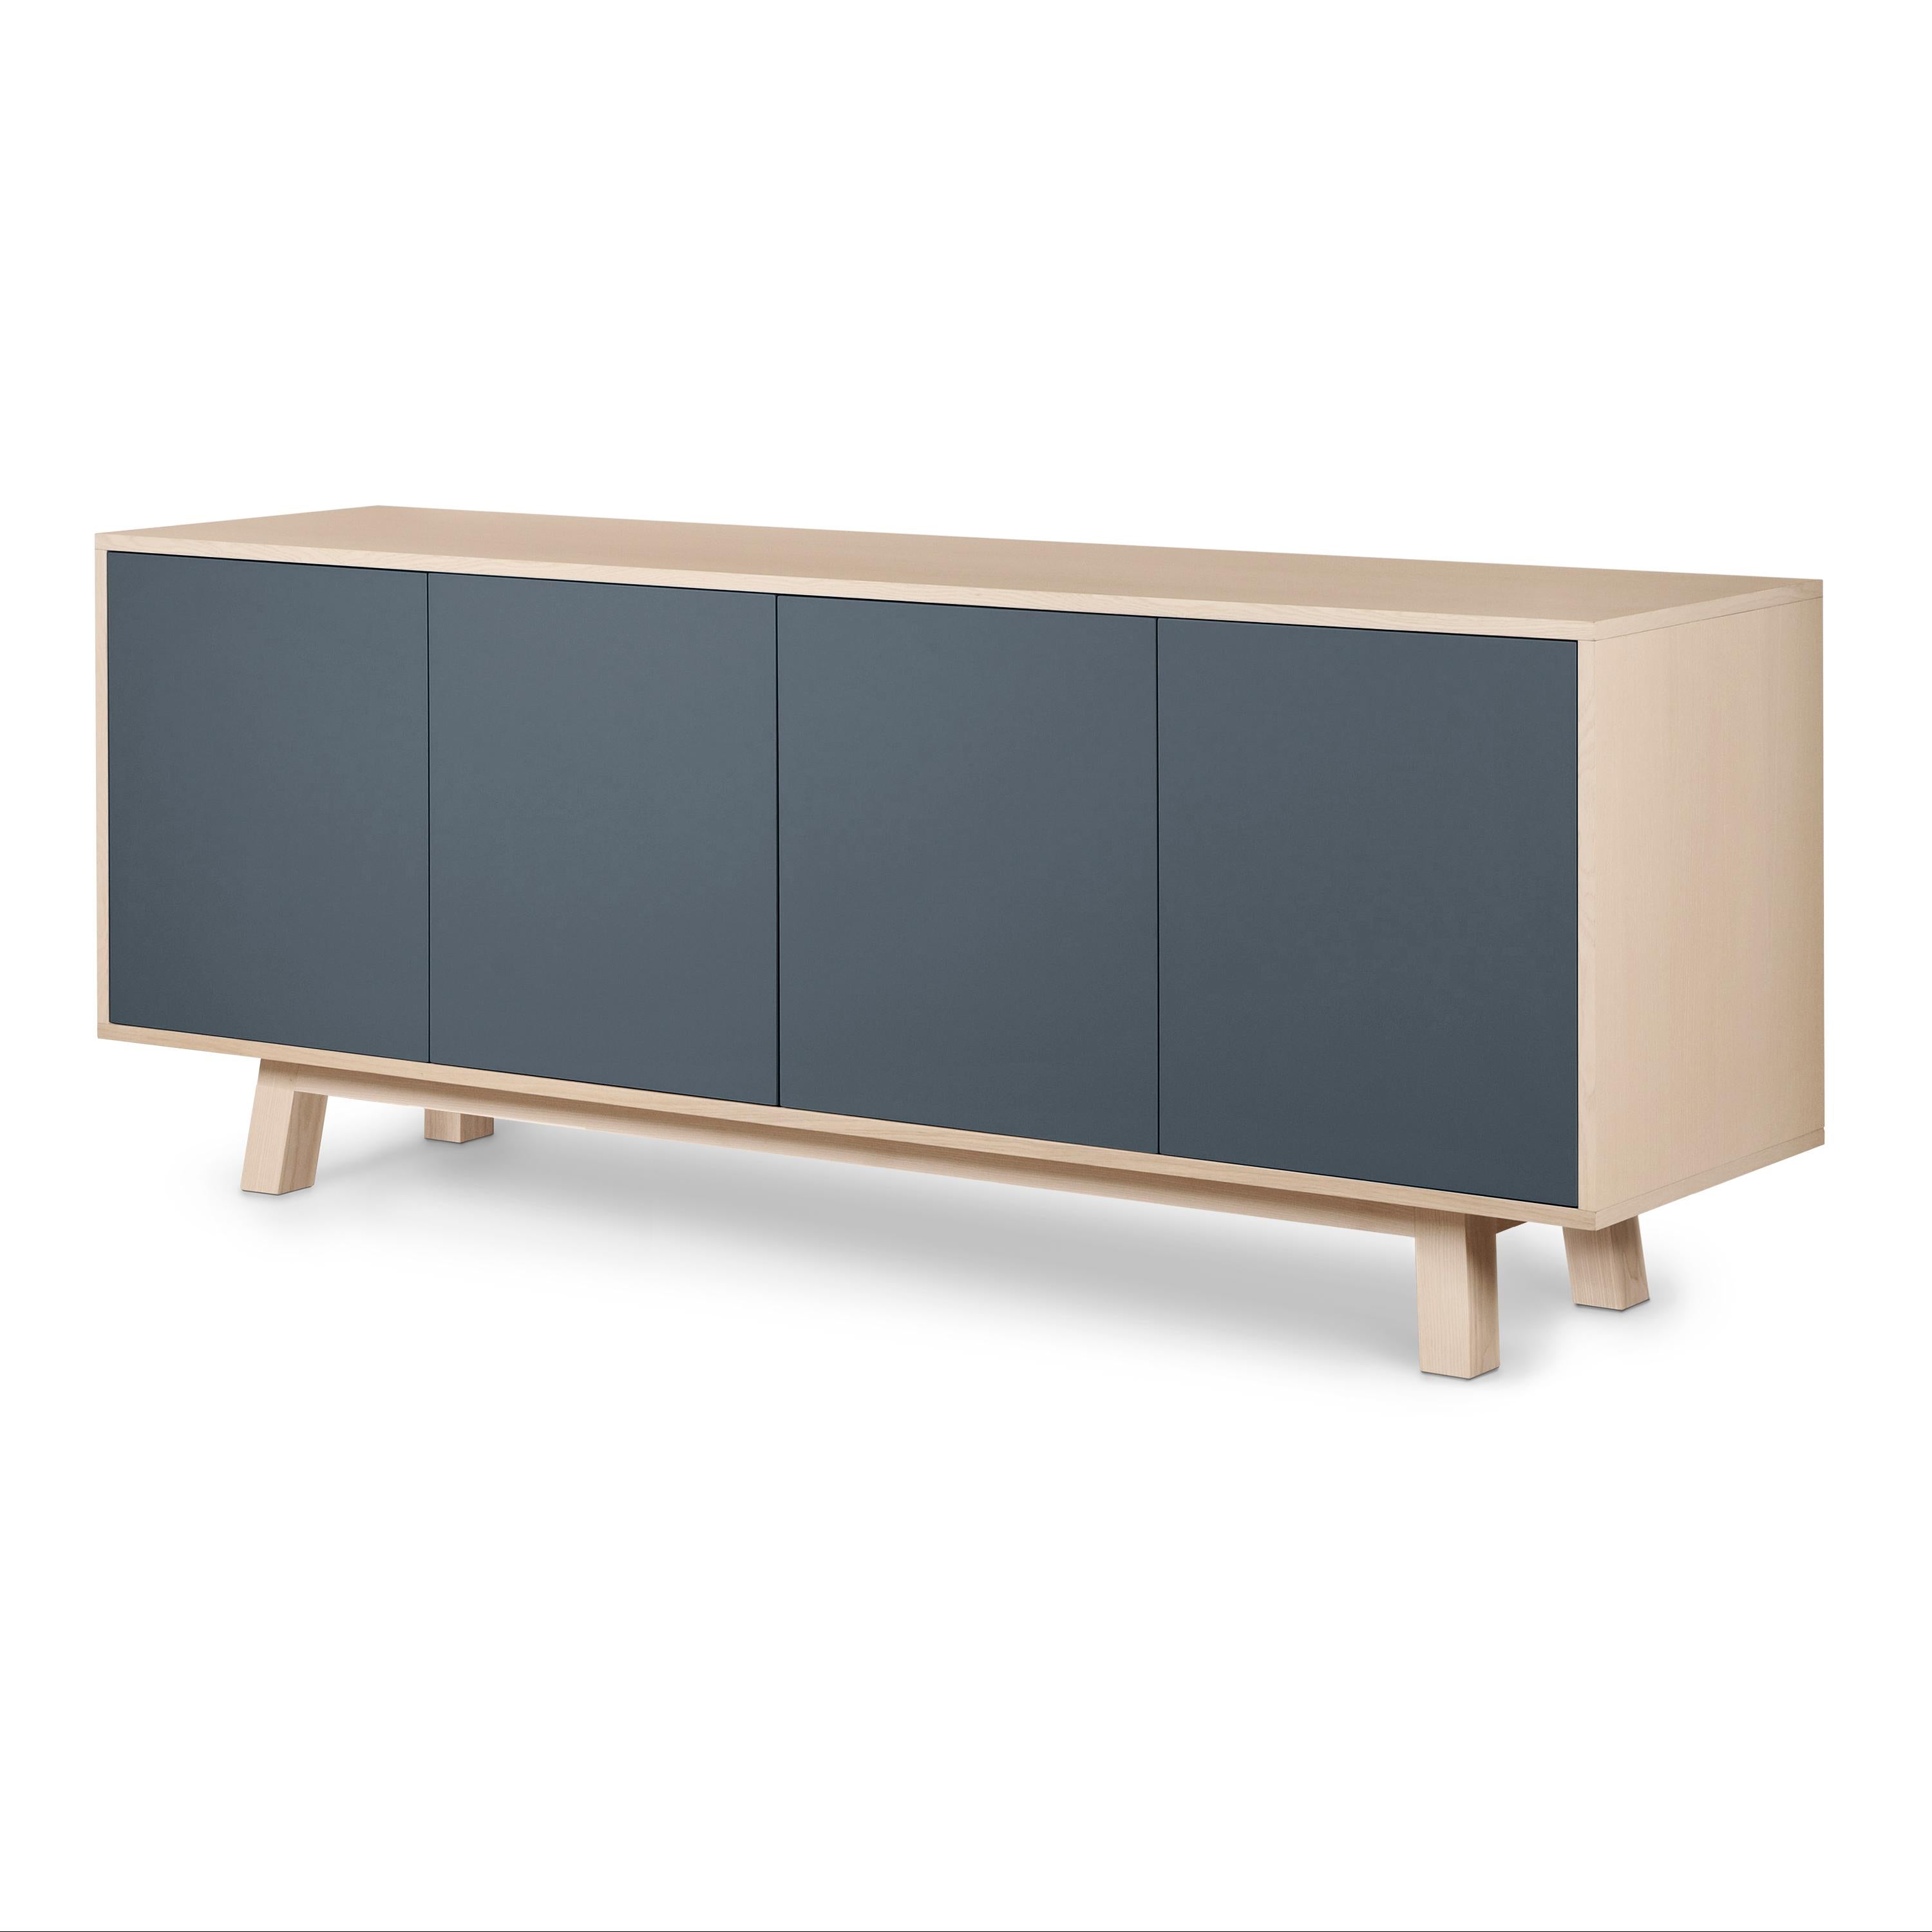 Lacquered Dark Blue 4-Door Sideboard, Design Eric Gizard, Paris, Made in France For Sale